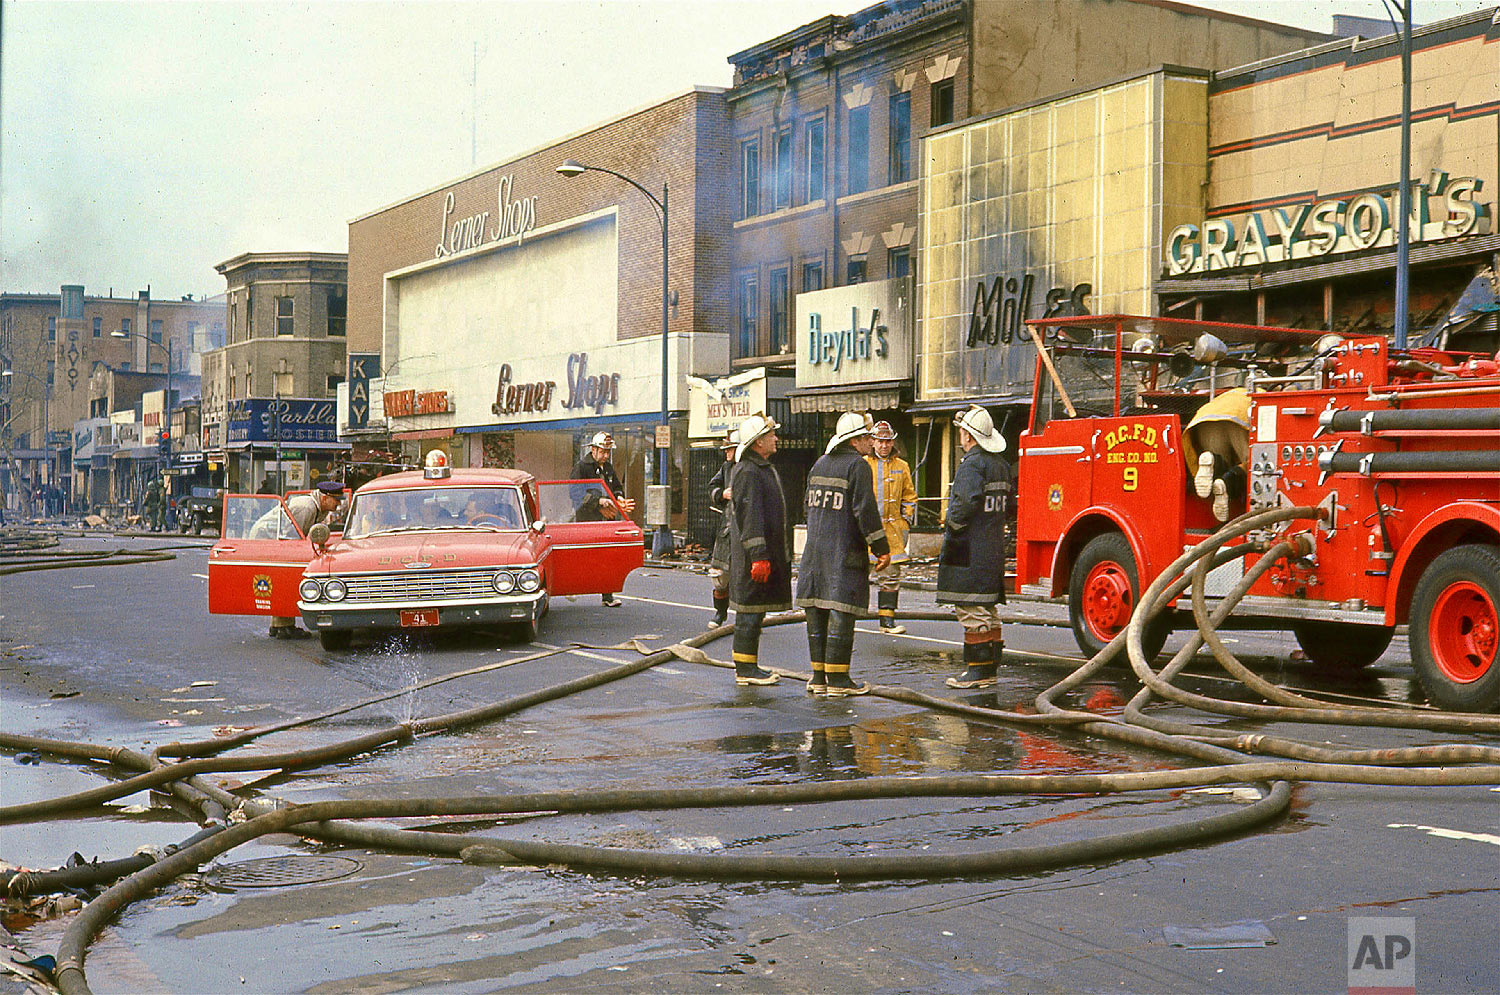  14th Street near Irving Street, 1968. Firemen gathered at a fire engine on 14th Street near Irving Street following rioting after the assassination of Dr. Martin Luther King, Jr., Saturday, April 6, 1968. Firehouses cover the ground. Burned storefro